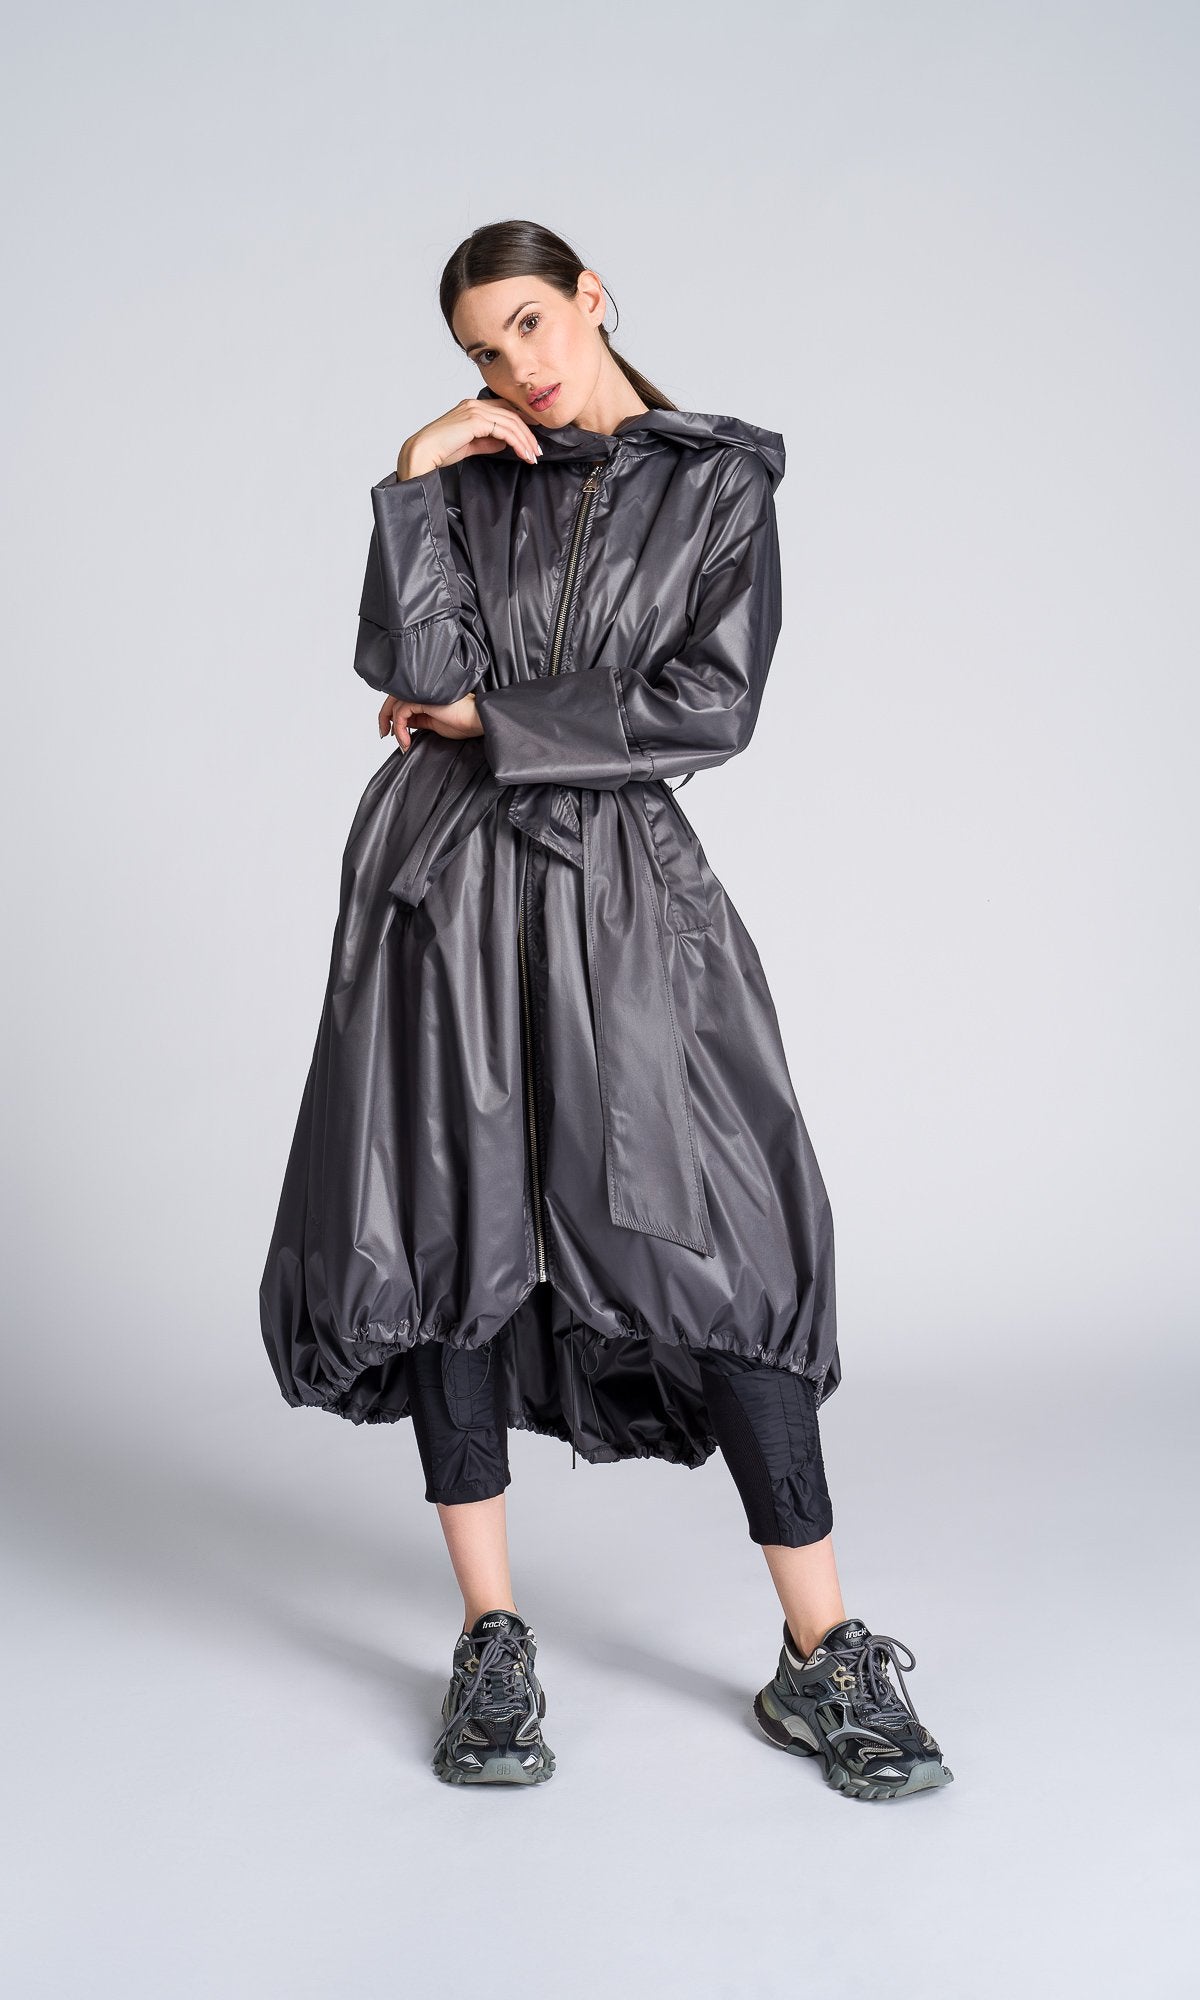 Hooded Raincoat with Belt